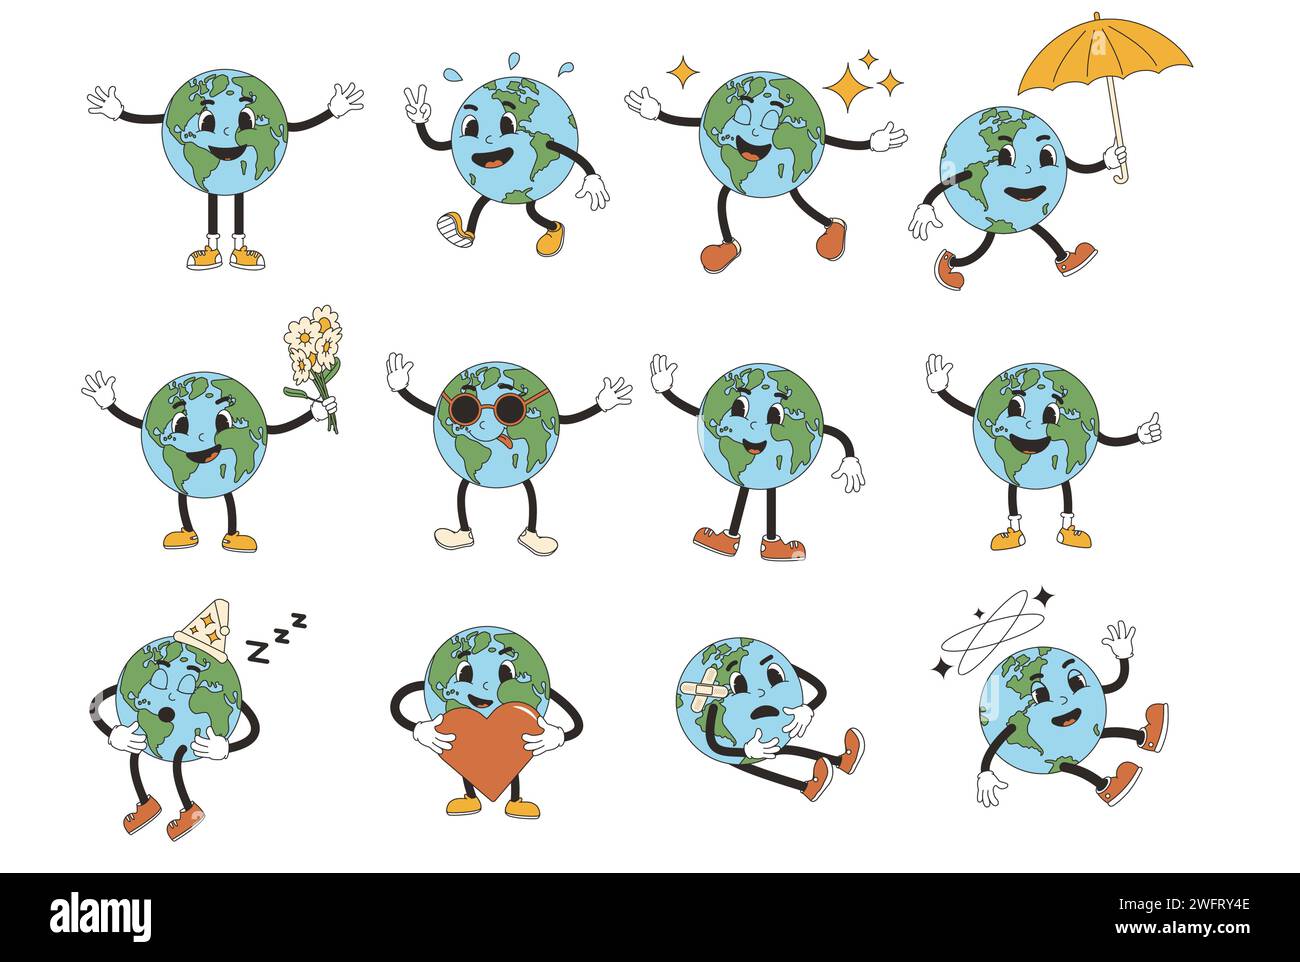 Earth in rubber hose style. Cute planet characters set isolated on white background. Retro mascots collections. Vector globe illustration. Stock Vector